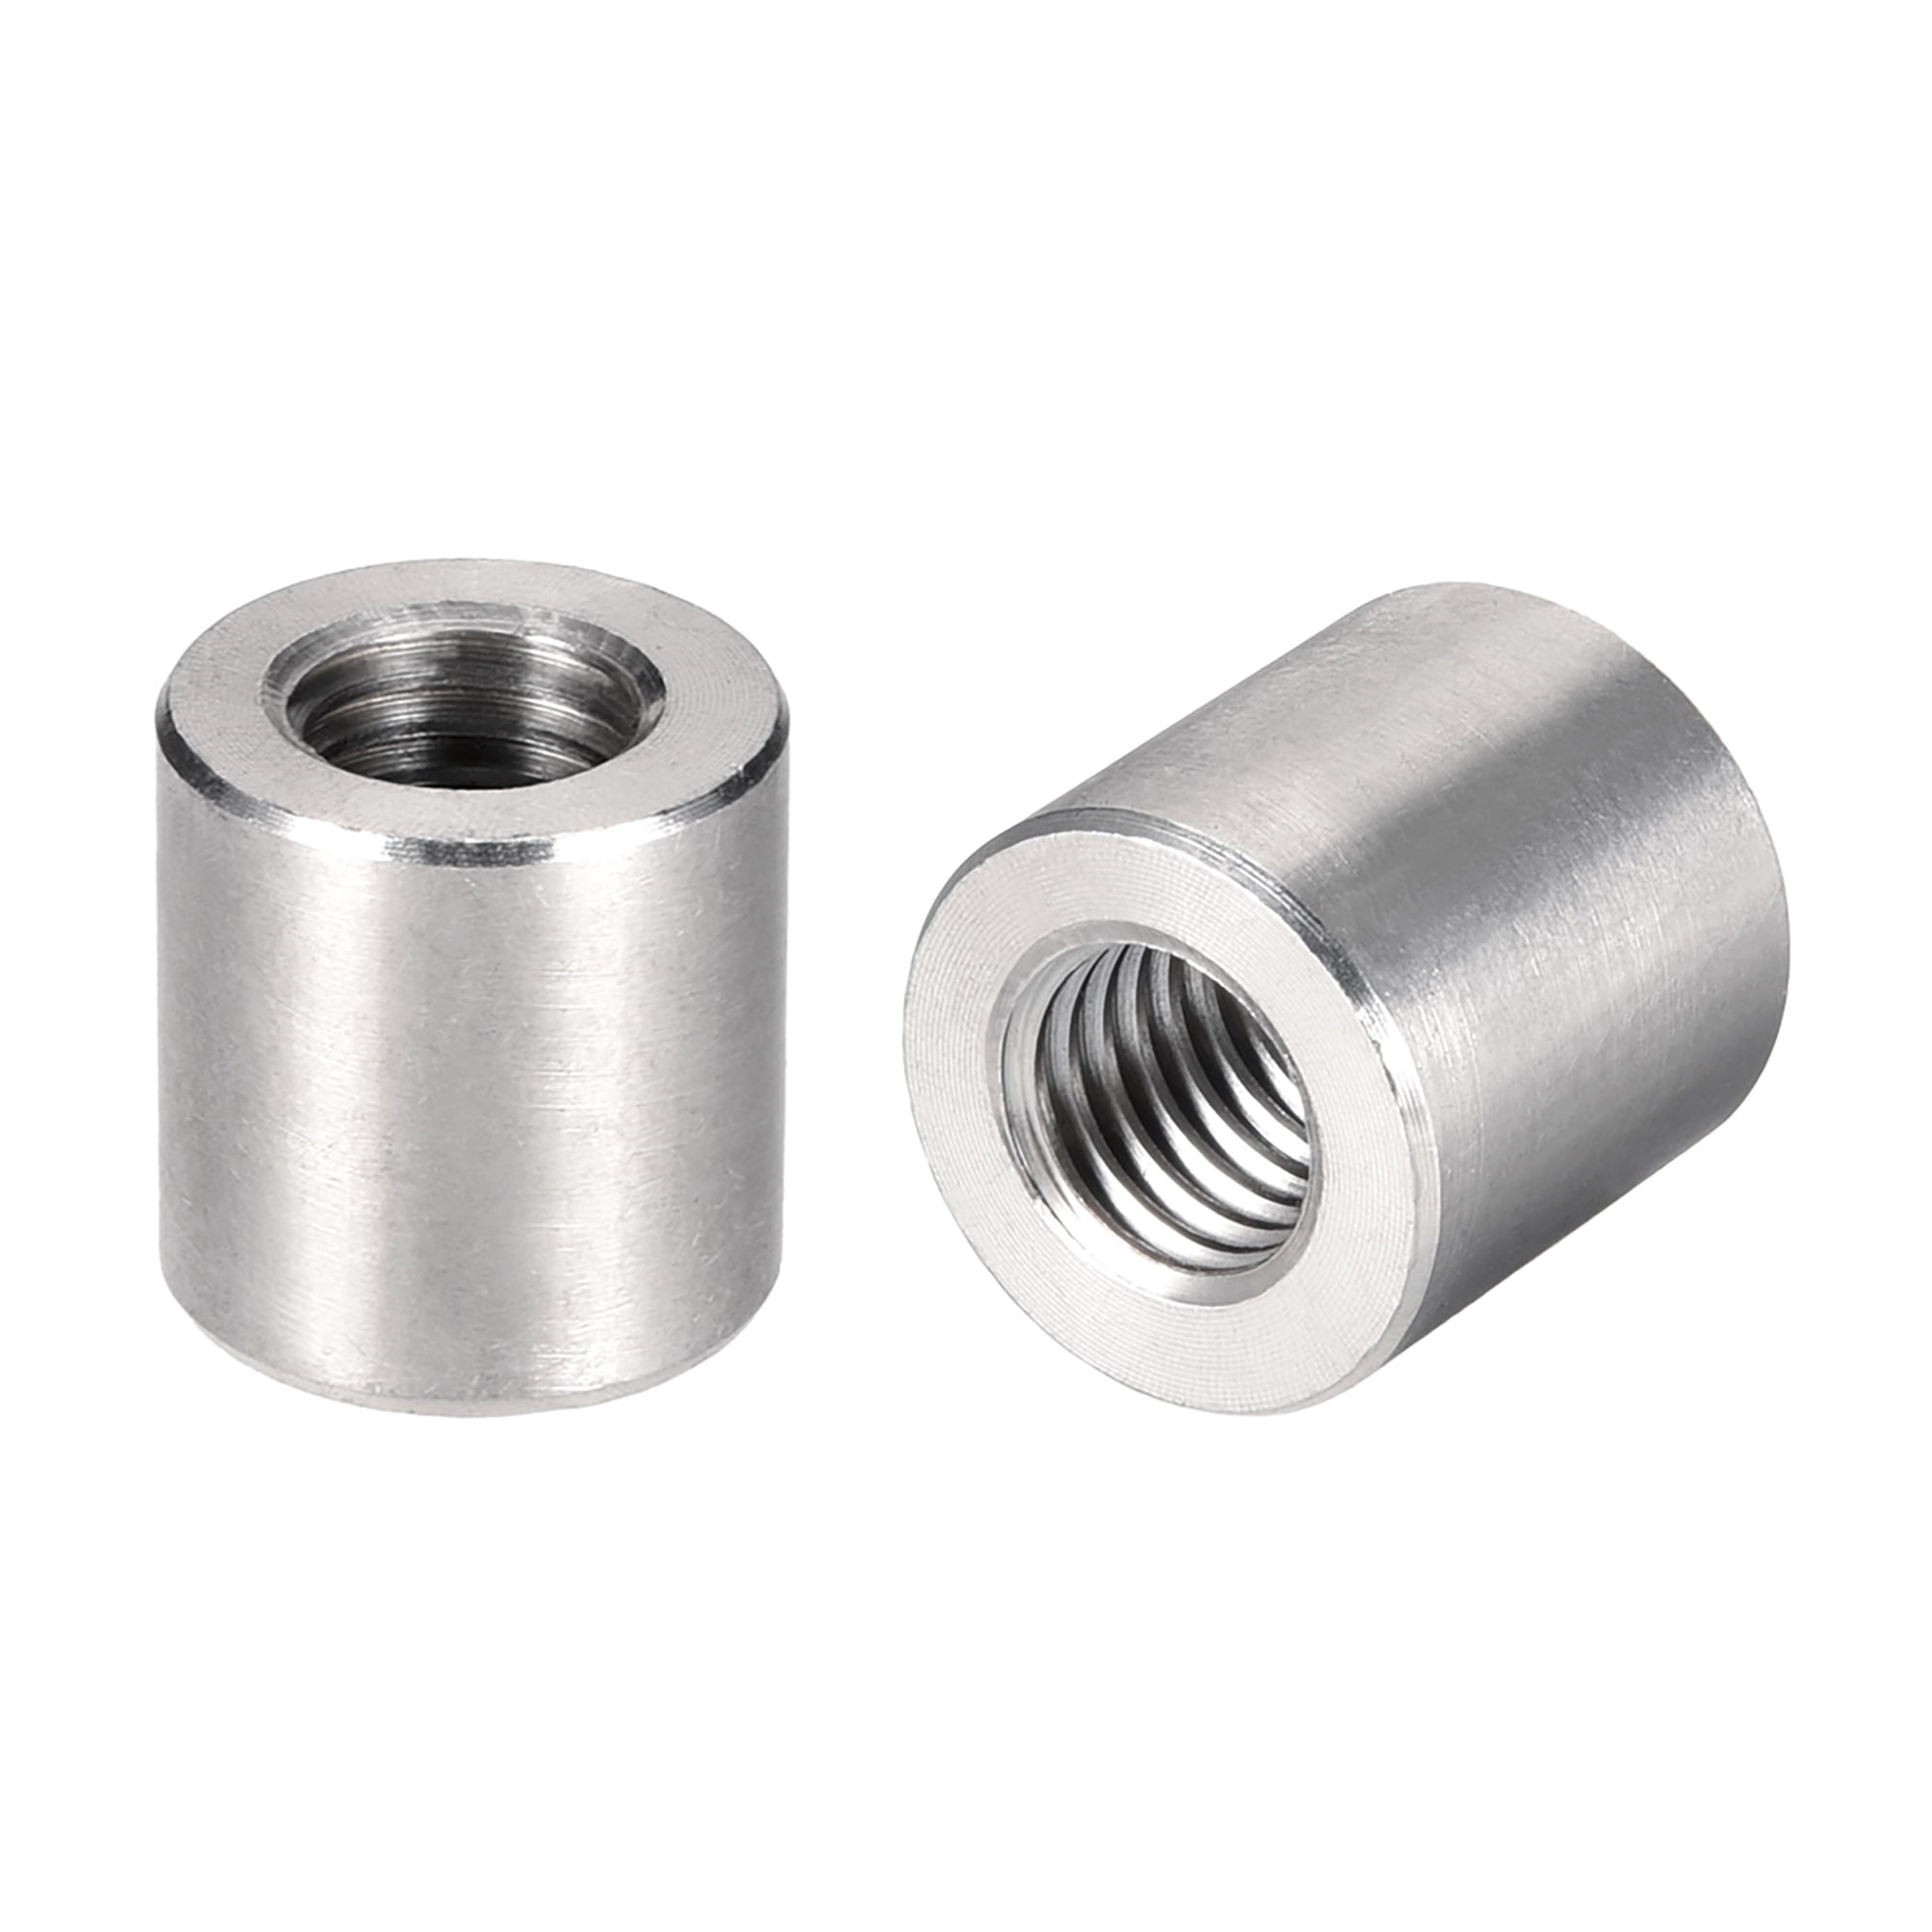 Round Connector Nuts, M12x20mm Height Sleeve Rod Nut Stainless steel 10